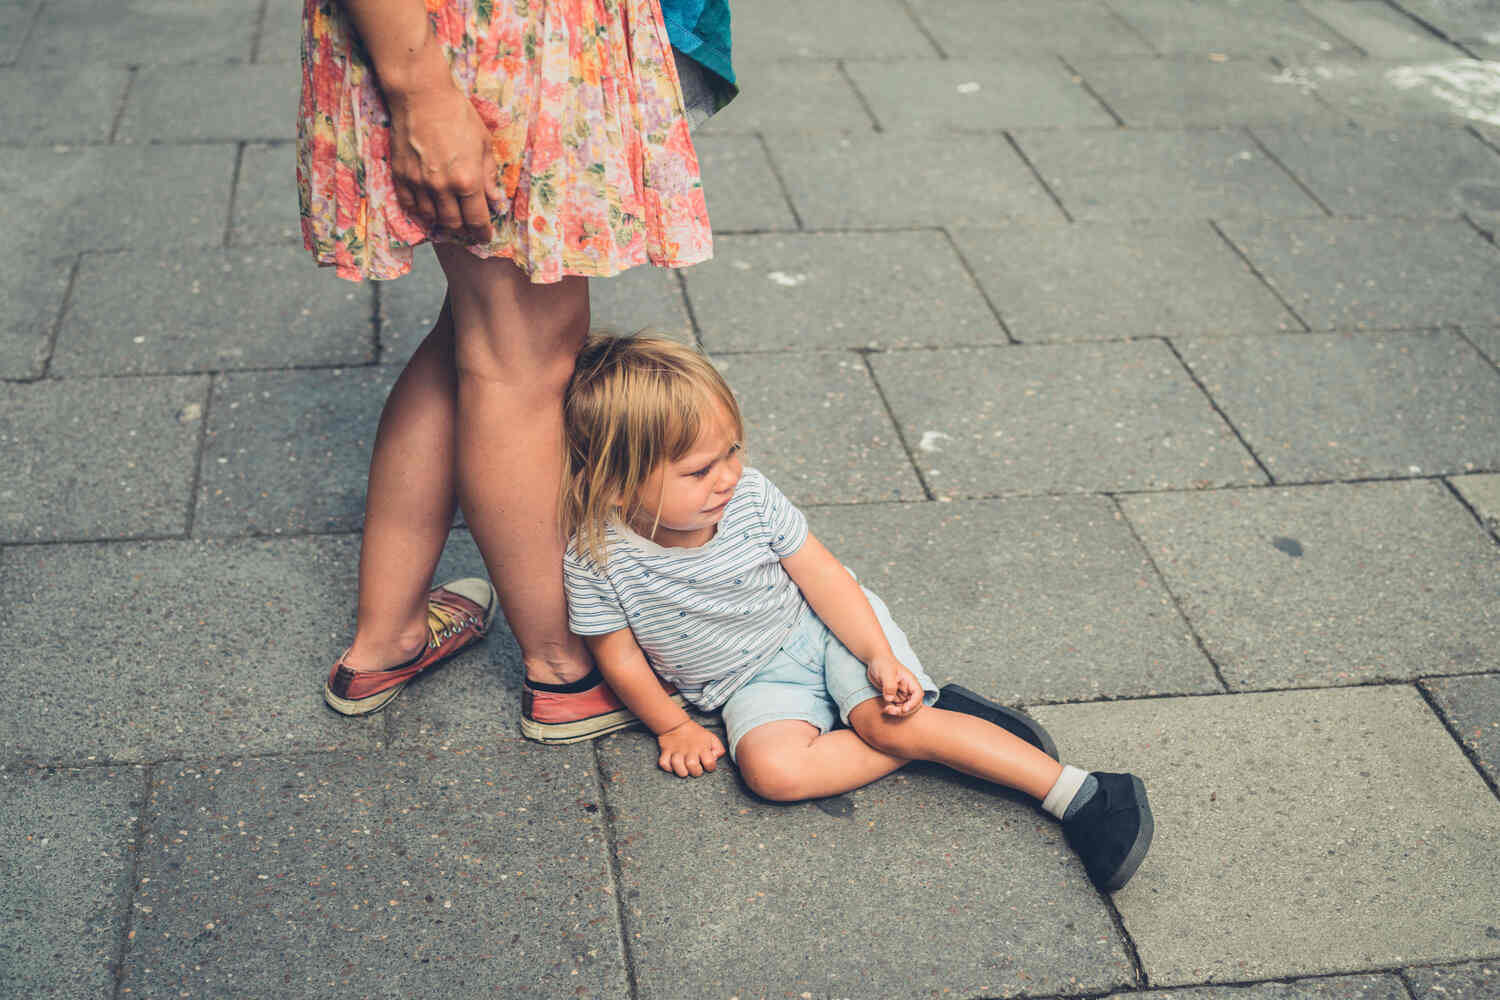 A toddler sitting on street and crying